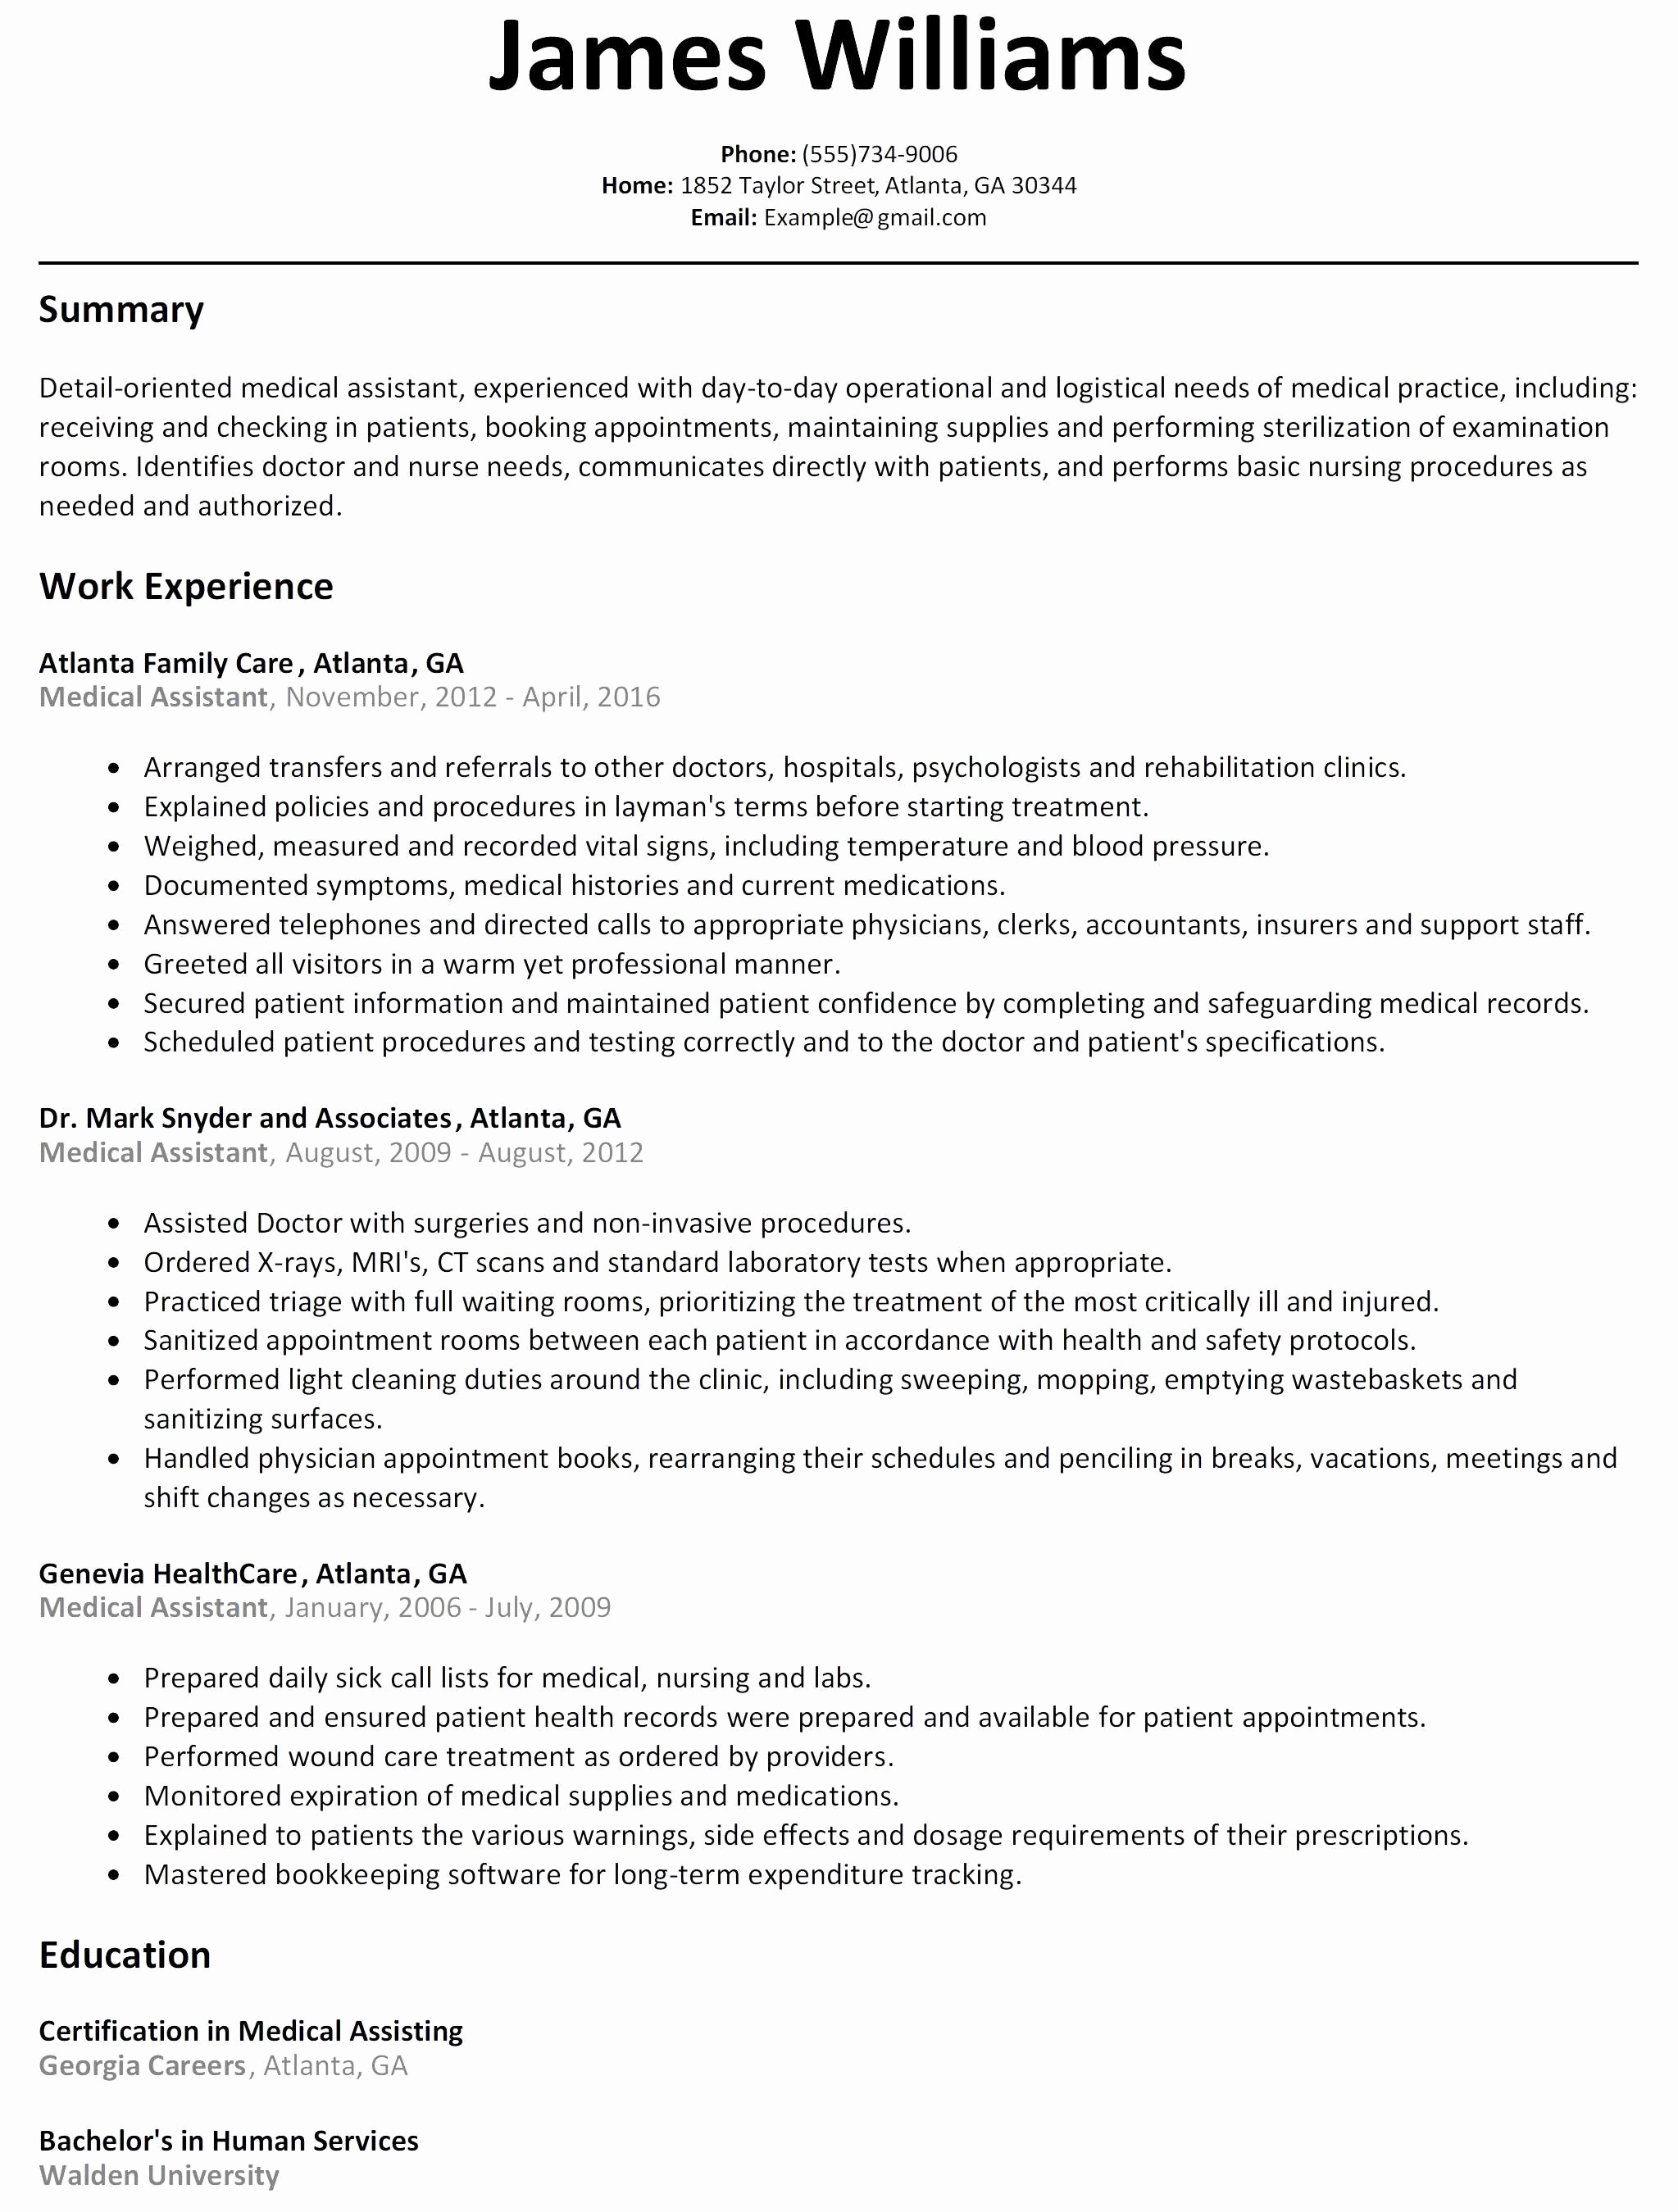 Human Resources Resume Sample Human Resources Resume Fresh Hr Resume Luxury Hr Assistant